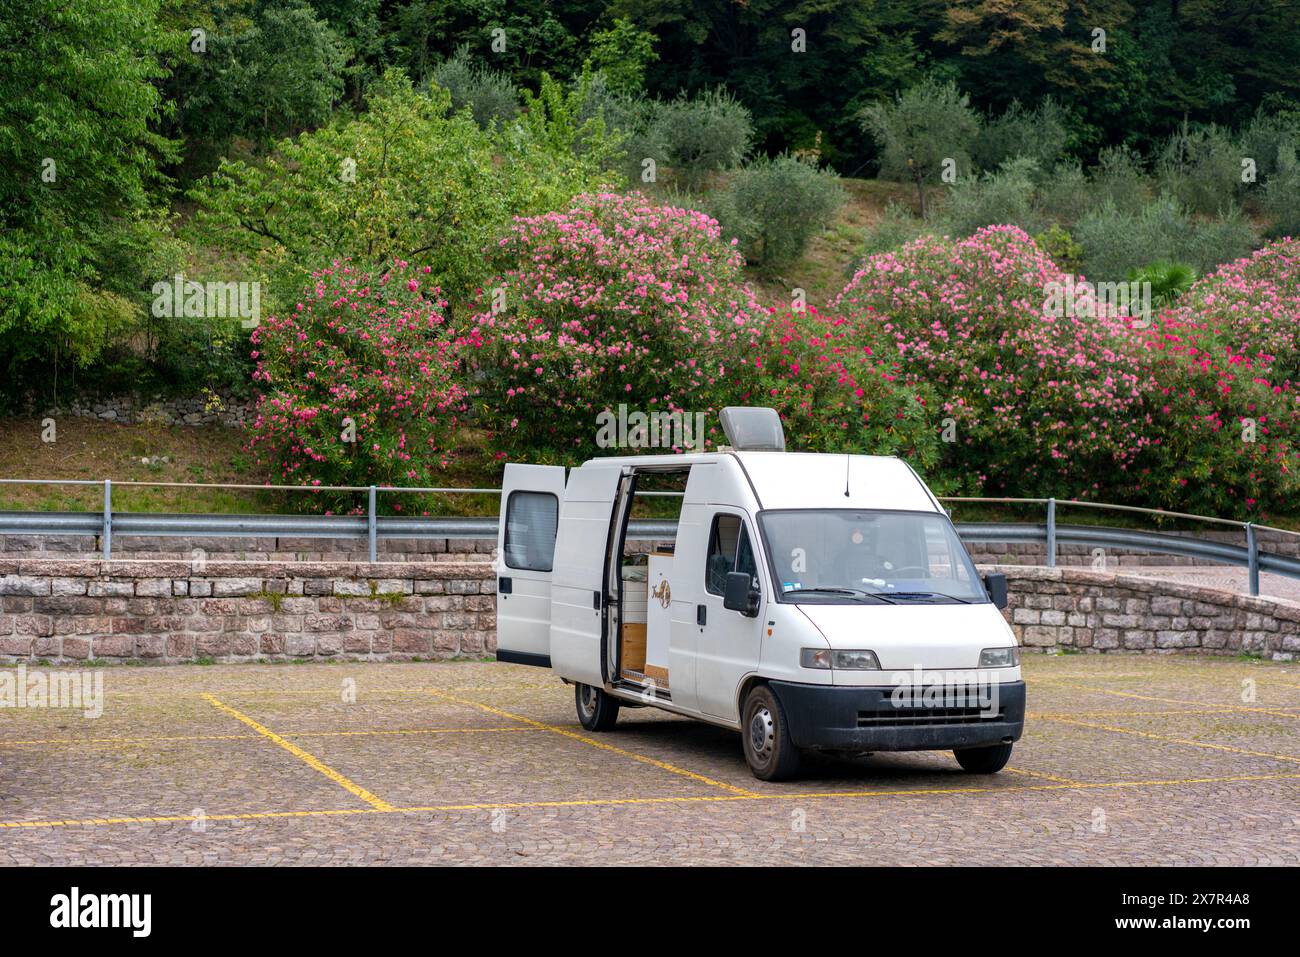 A white van with open doors parked on a cobblestone parking area with blooming pink flowers and green foliage in the background, indicative of a leisu Stock Photo